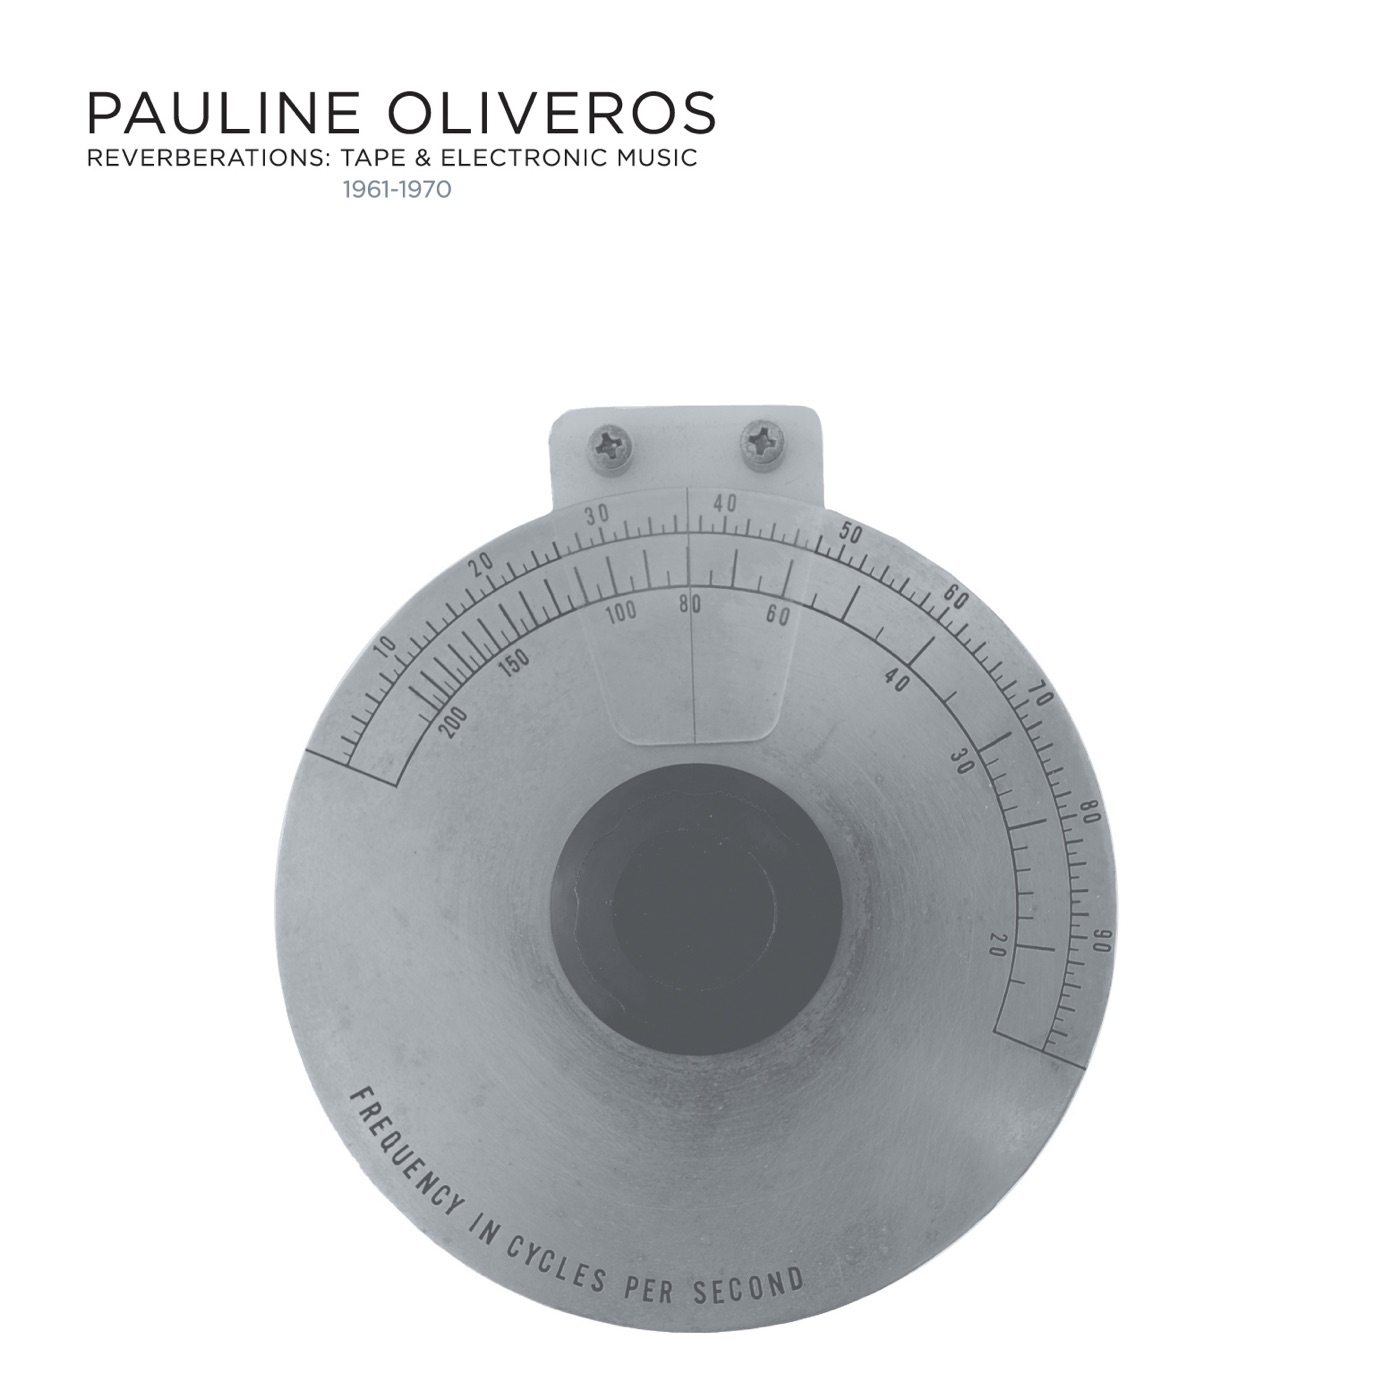 Reverberations: Tape & Electronic Music 1961-1970 by Pauline Oliveros